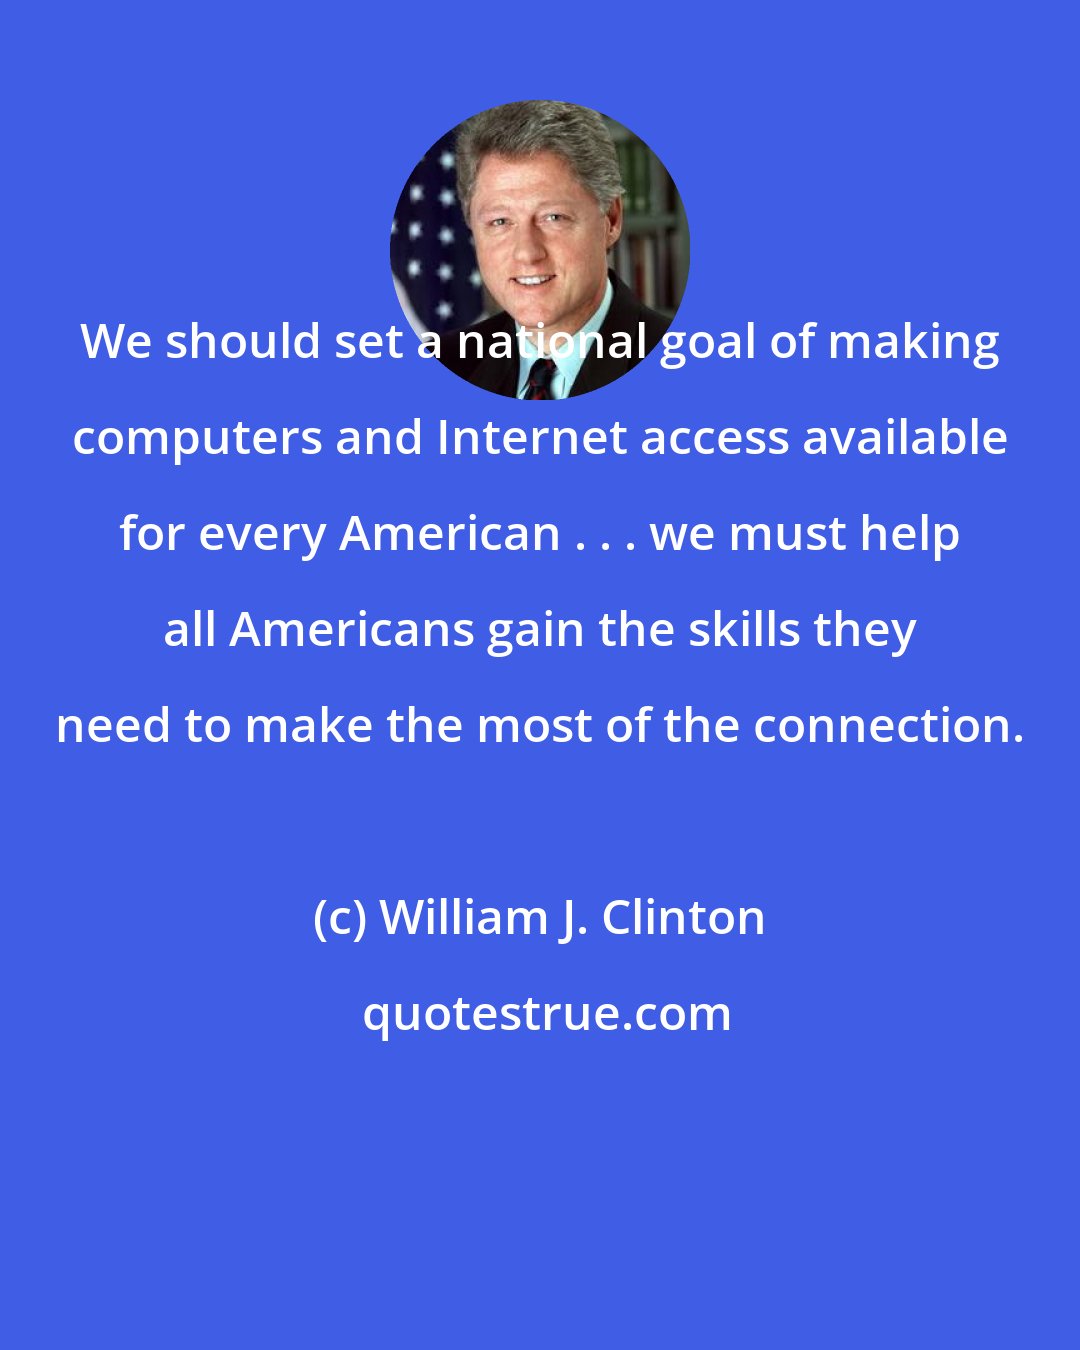 William J. Clinton: We should set a national goal of making computers and Internet access available for every American . . . we must help all Americans gain the skills they need to make the most of the connection.